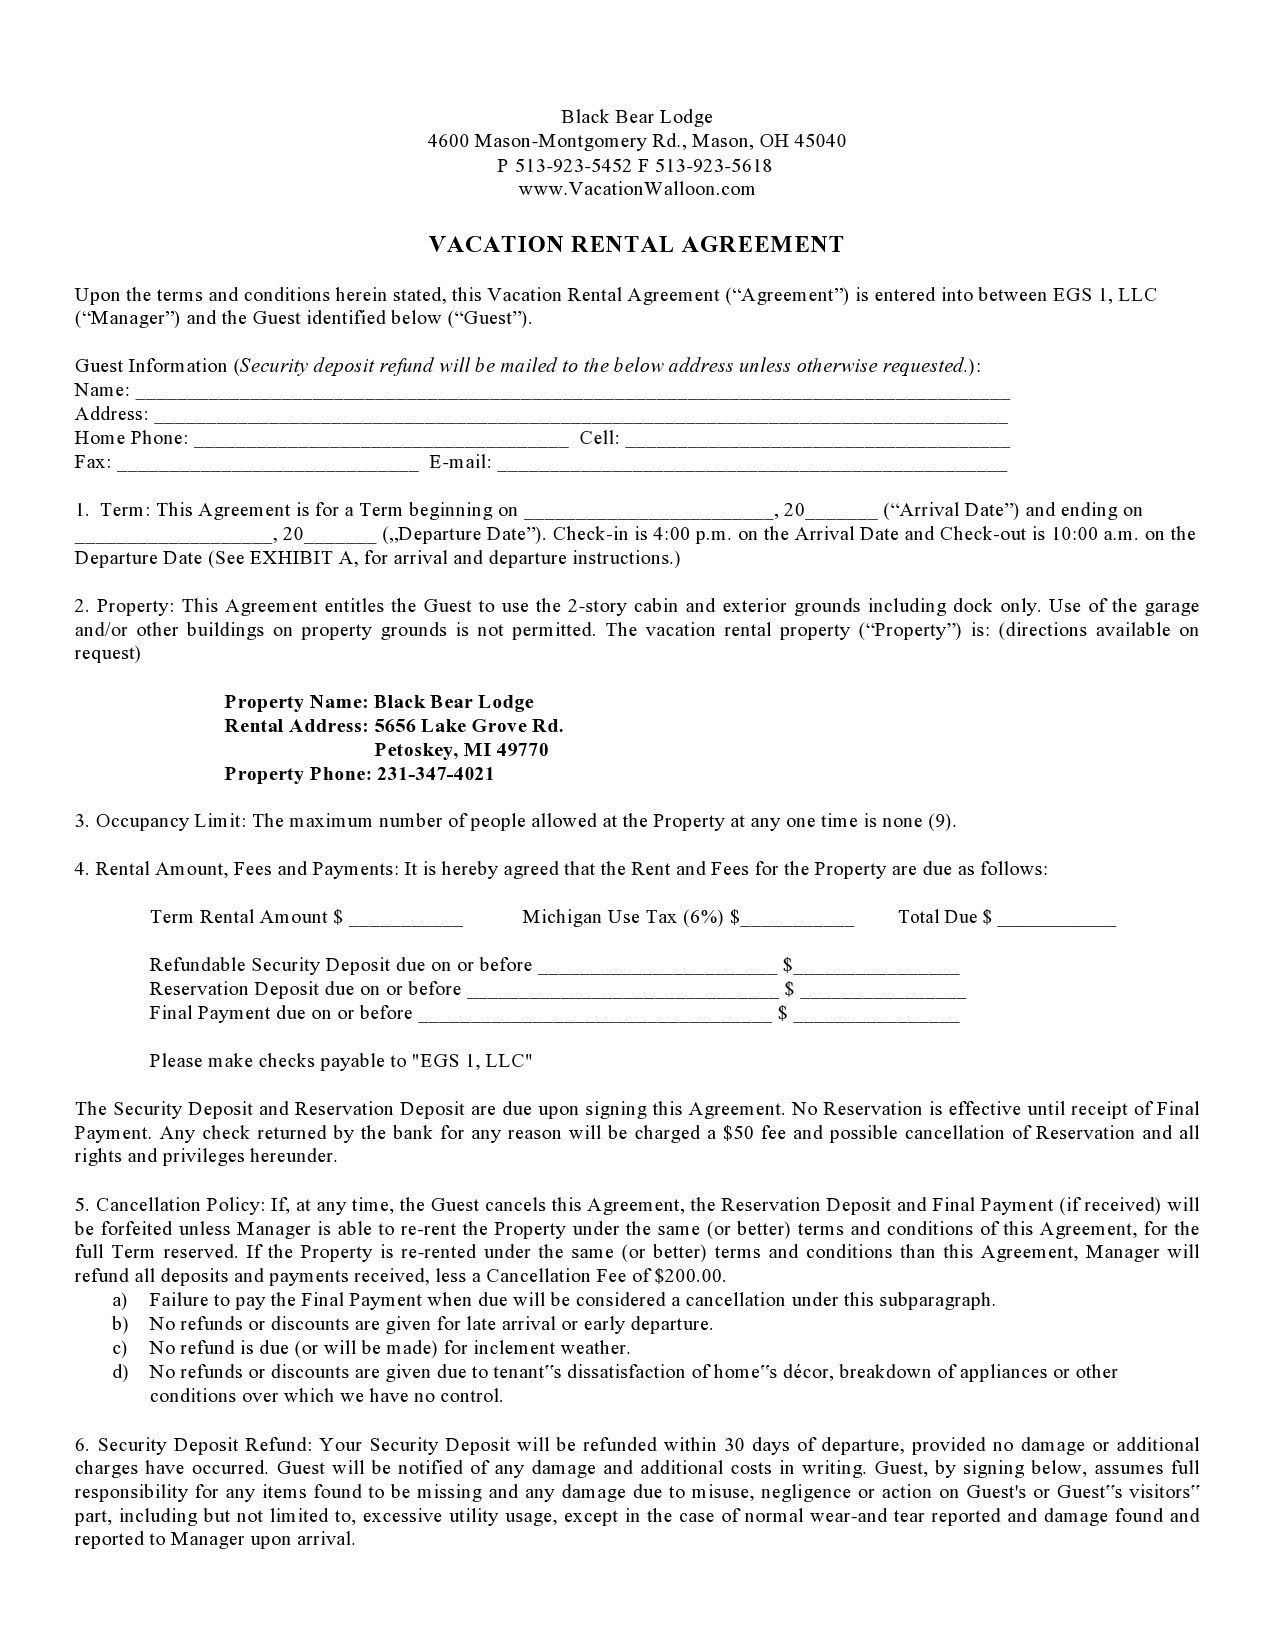 Free vacation rental agreement 21